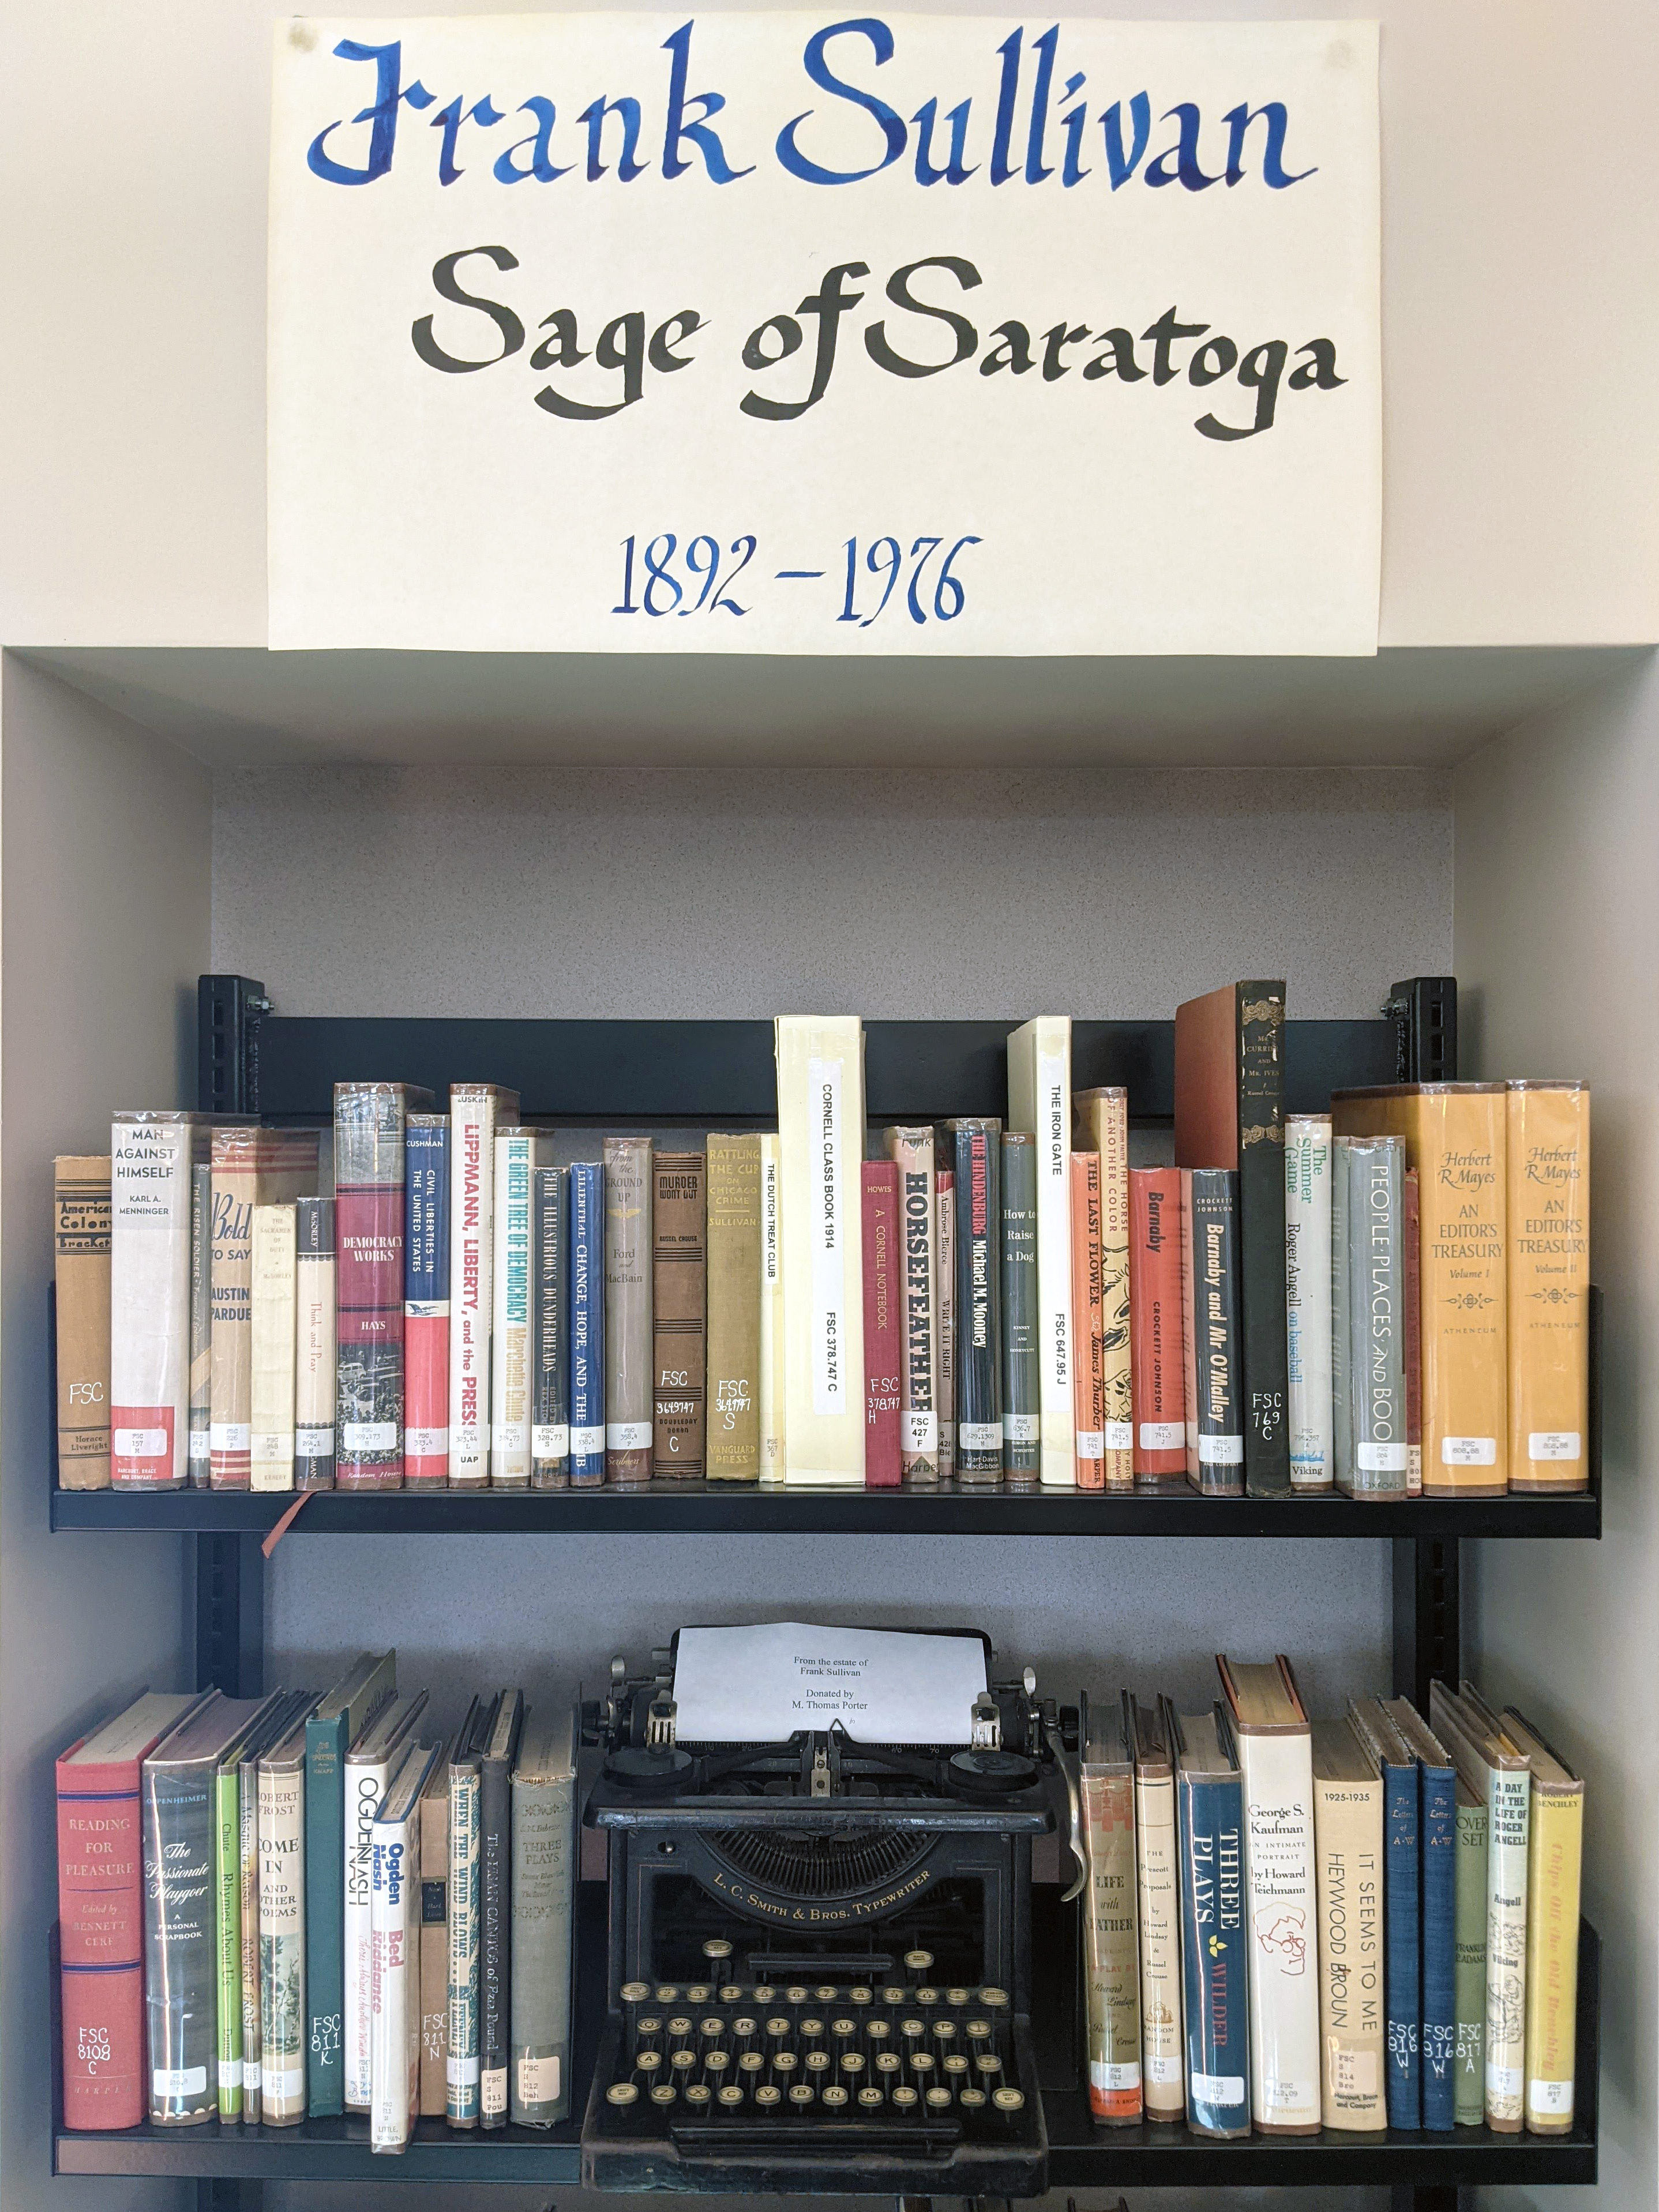 Calligraphically written sign on paper, attached to a wall to designate a collection referencing material on “Frank Sullivan, Sage of Saratoga (1892-1976)”.